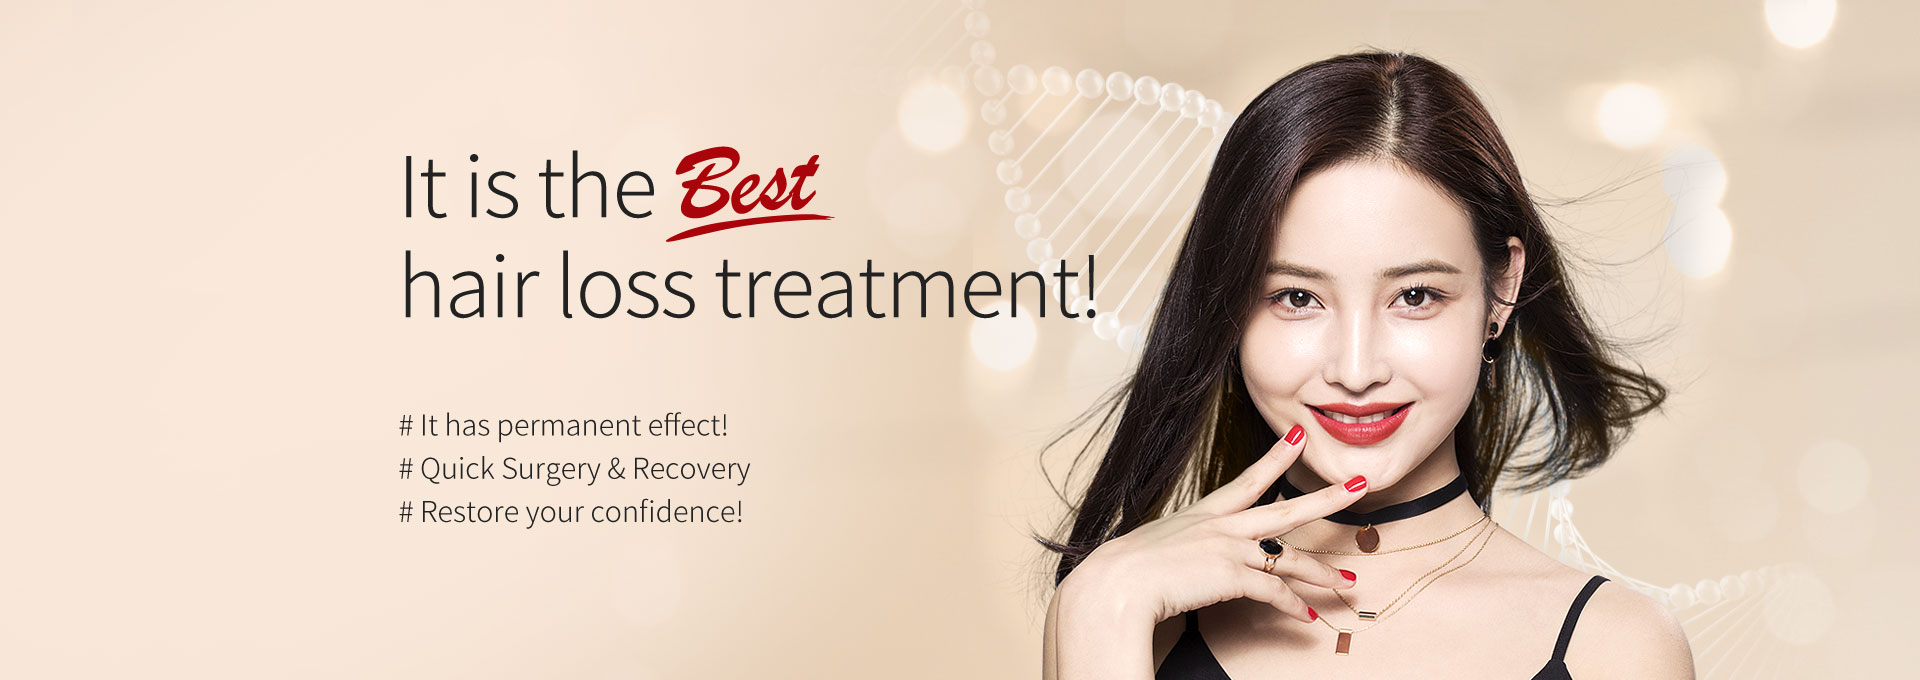 It is the best hair loss treatment!